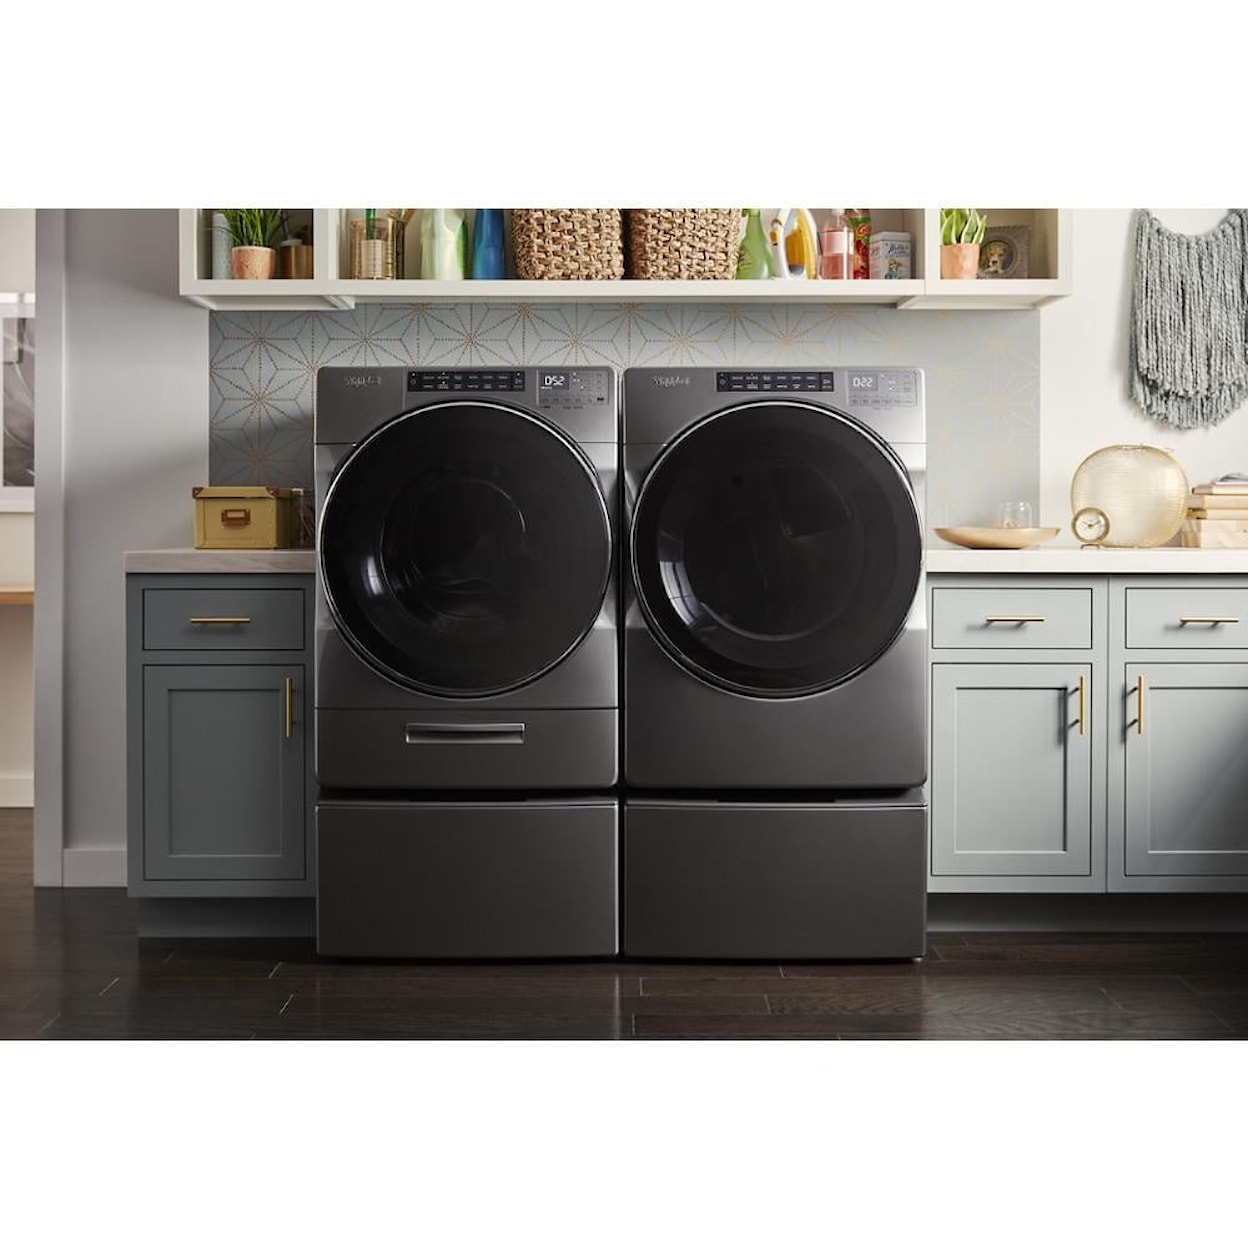 Whirlpool Laundry Front Load Electric Dryer